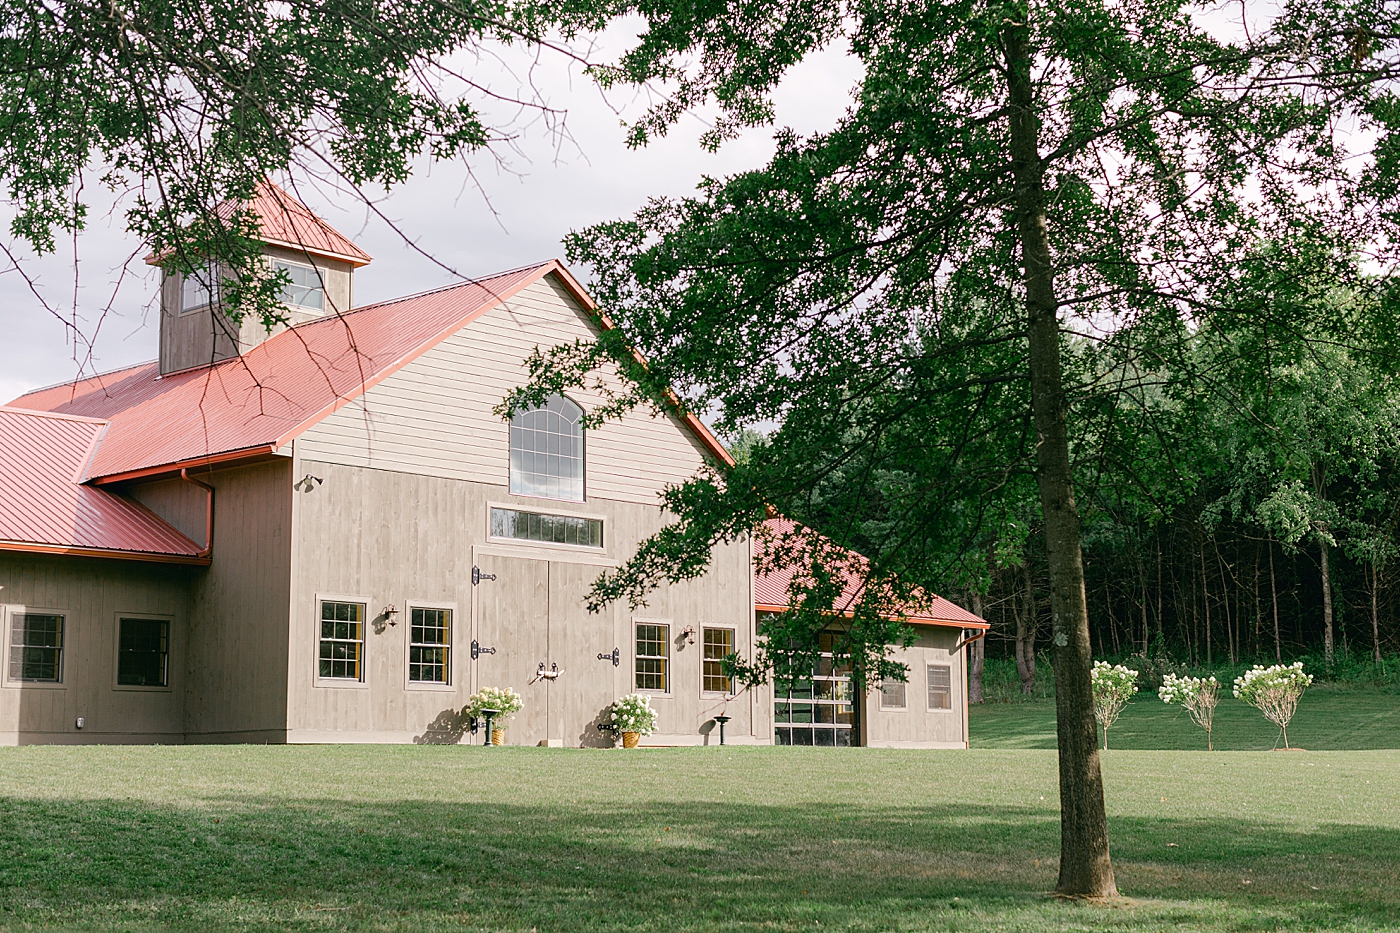 Barn wedding venue | Image by Hope Helmuth Photography